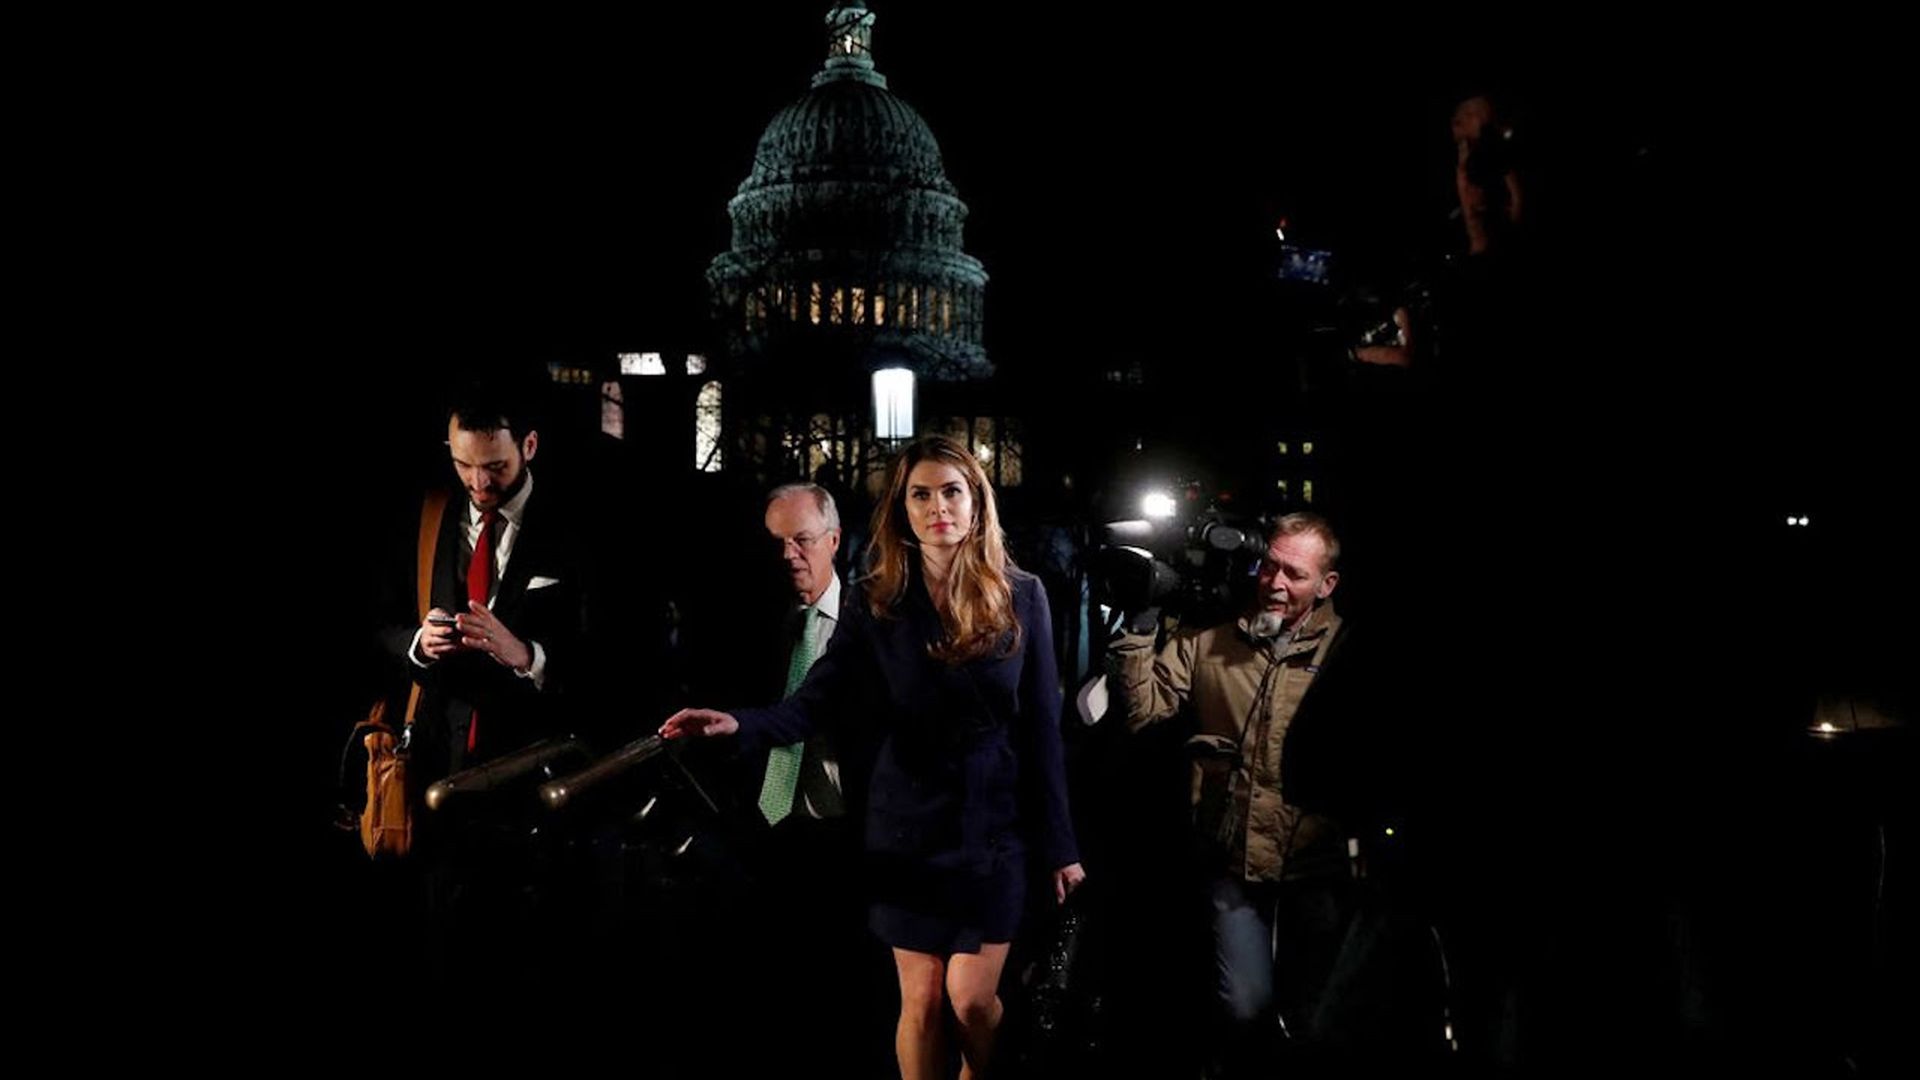 Hope Hicks walking as she's about to fling her suitcase with a crowd behind her